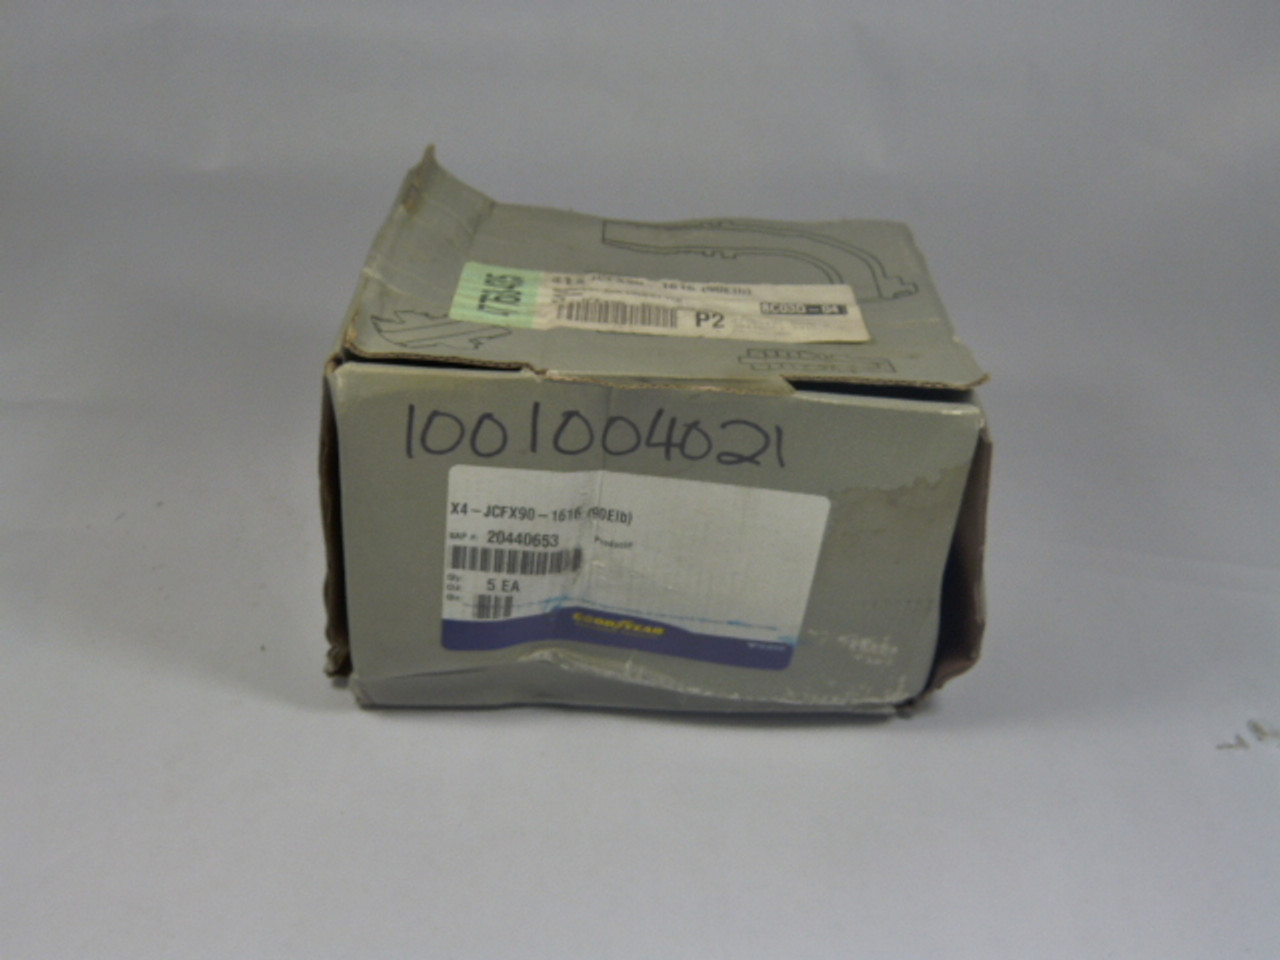 Goodyear X4-JCFX90-1616 Hydraulic Hose Fitting 5-Pack ! NEW !